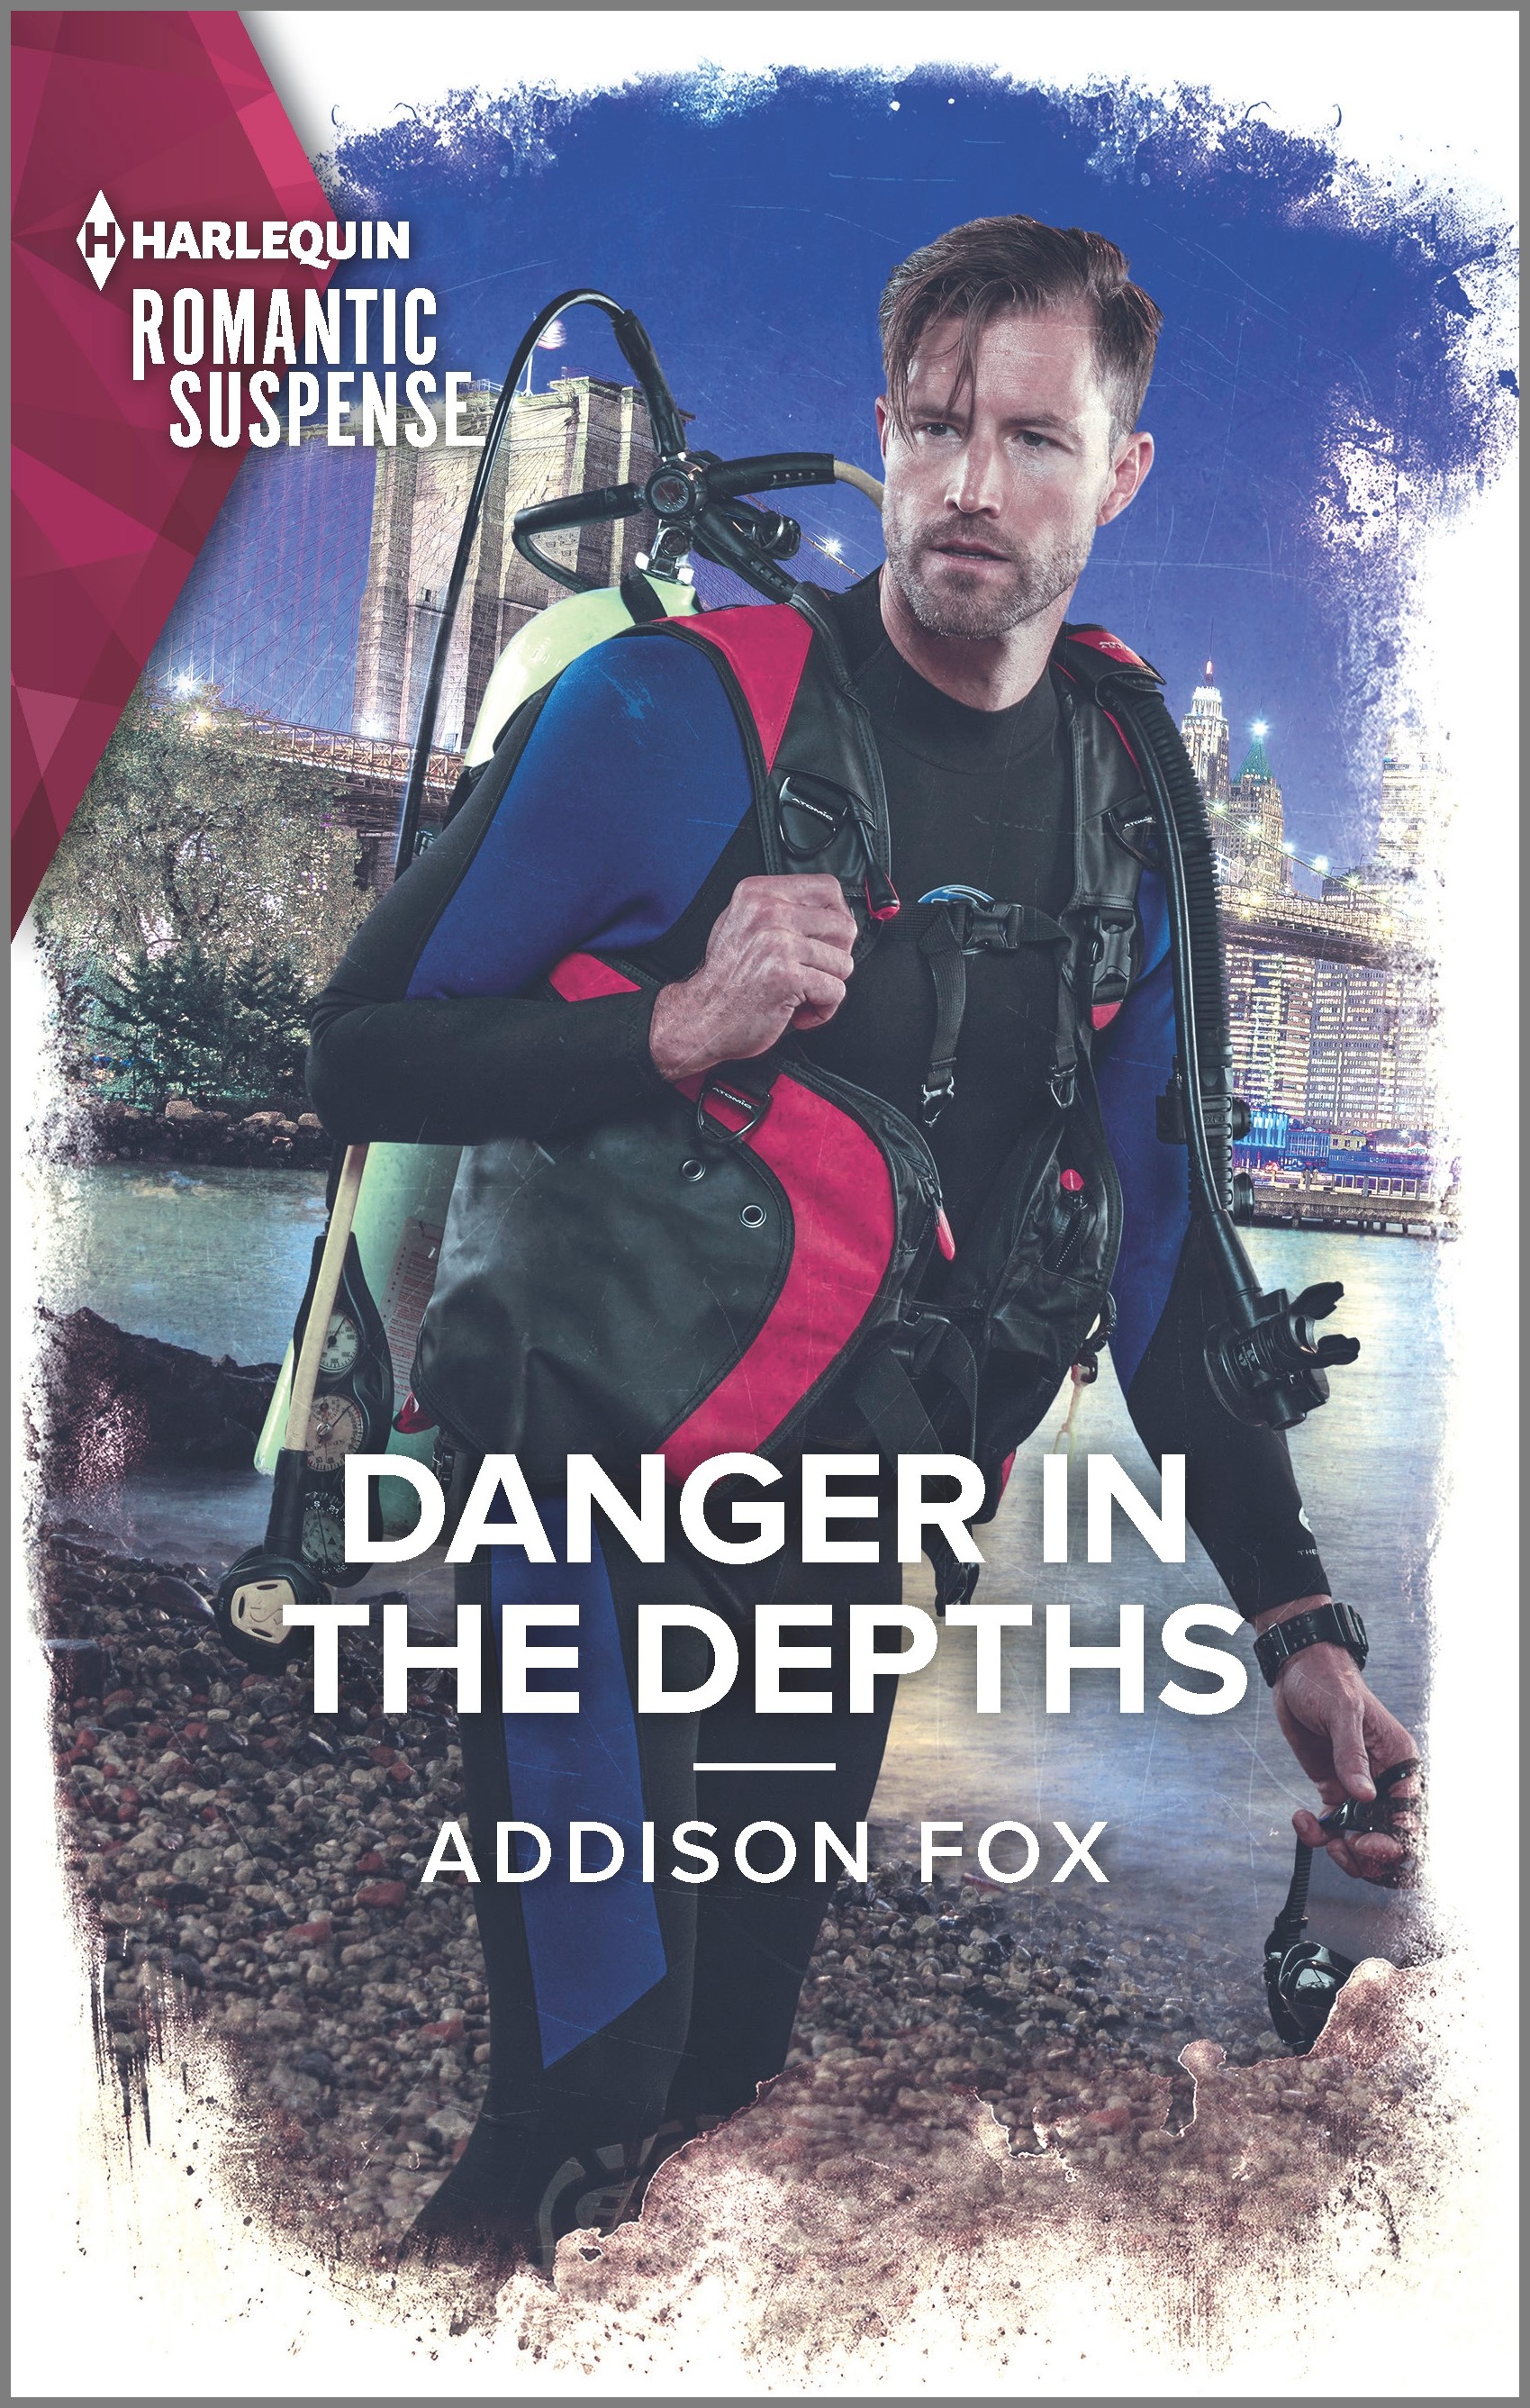 Danger in the Depths by Addison Fox